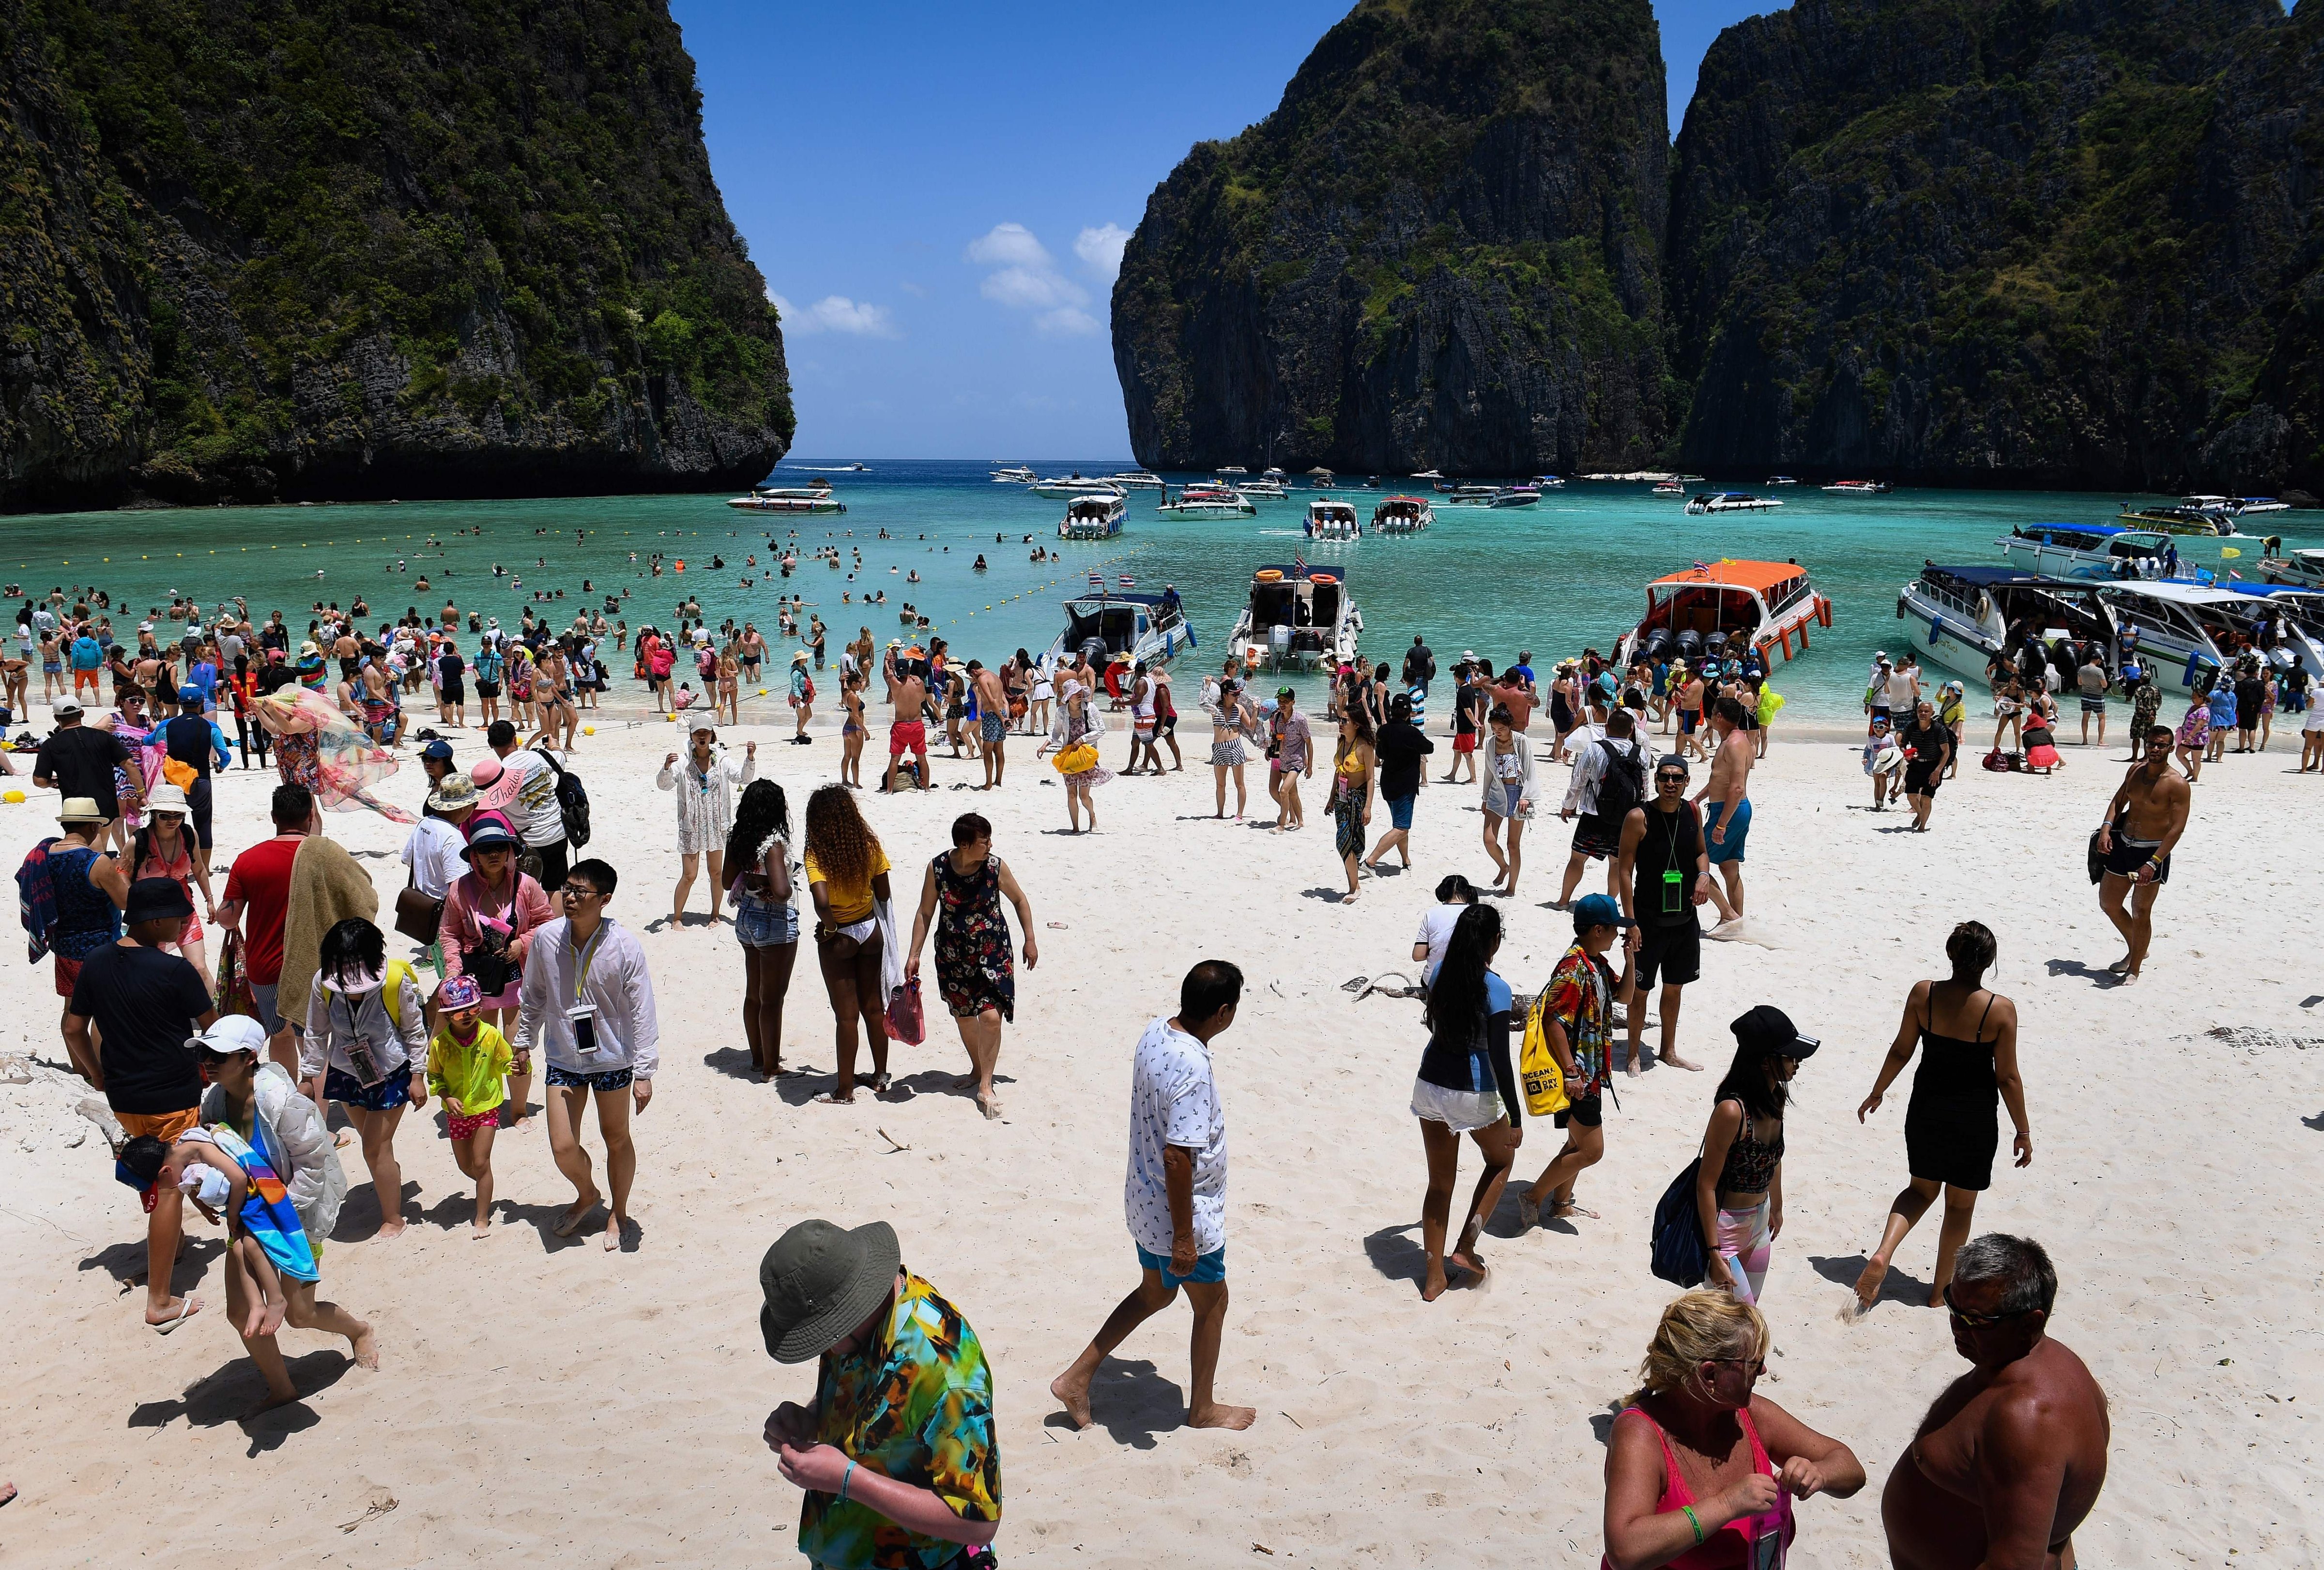 This photo taken on April 9, 2018 shows a crowd of tourists on the Maya Bay beach, on the southern Thai island of Koh Phi Phi.  
                      Across the region, Southeast Asia's once-pristine beaches are reeling from decades of unchecked tourism as governments scramble to confront trash-filled waters and environmental degradation without puncturing a key economic driver. (LILLIAN SUWANRUMPHA&mdash;AFP/Getty Images)